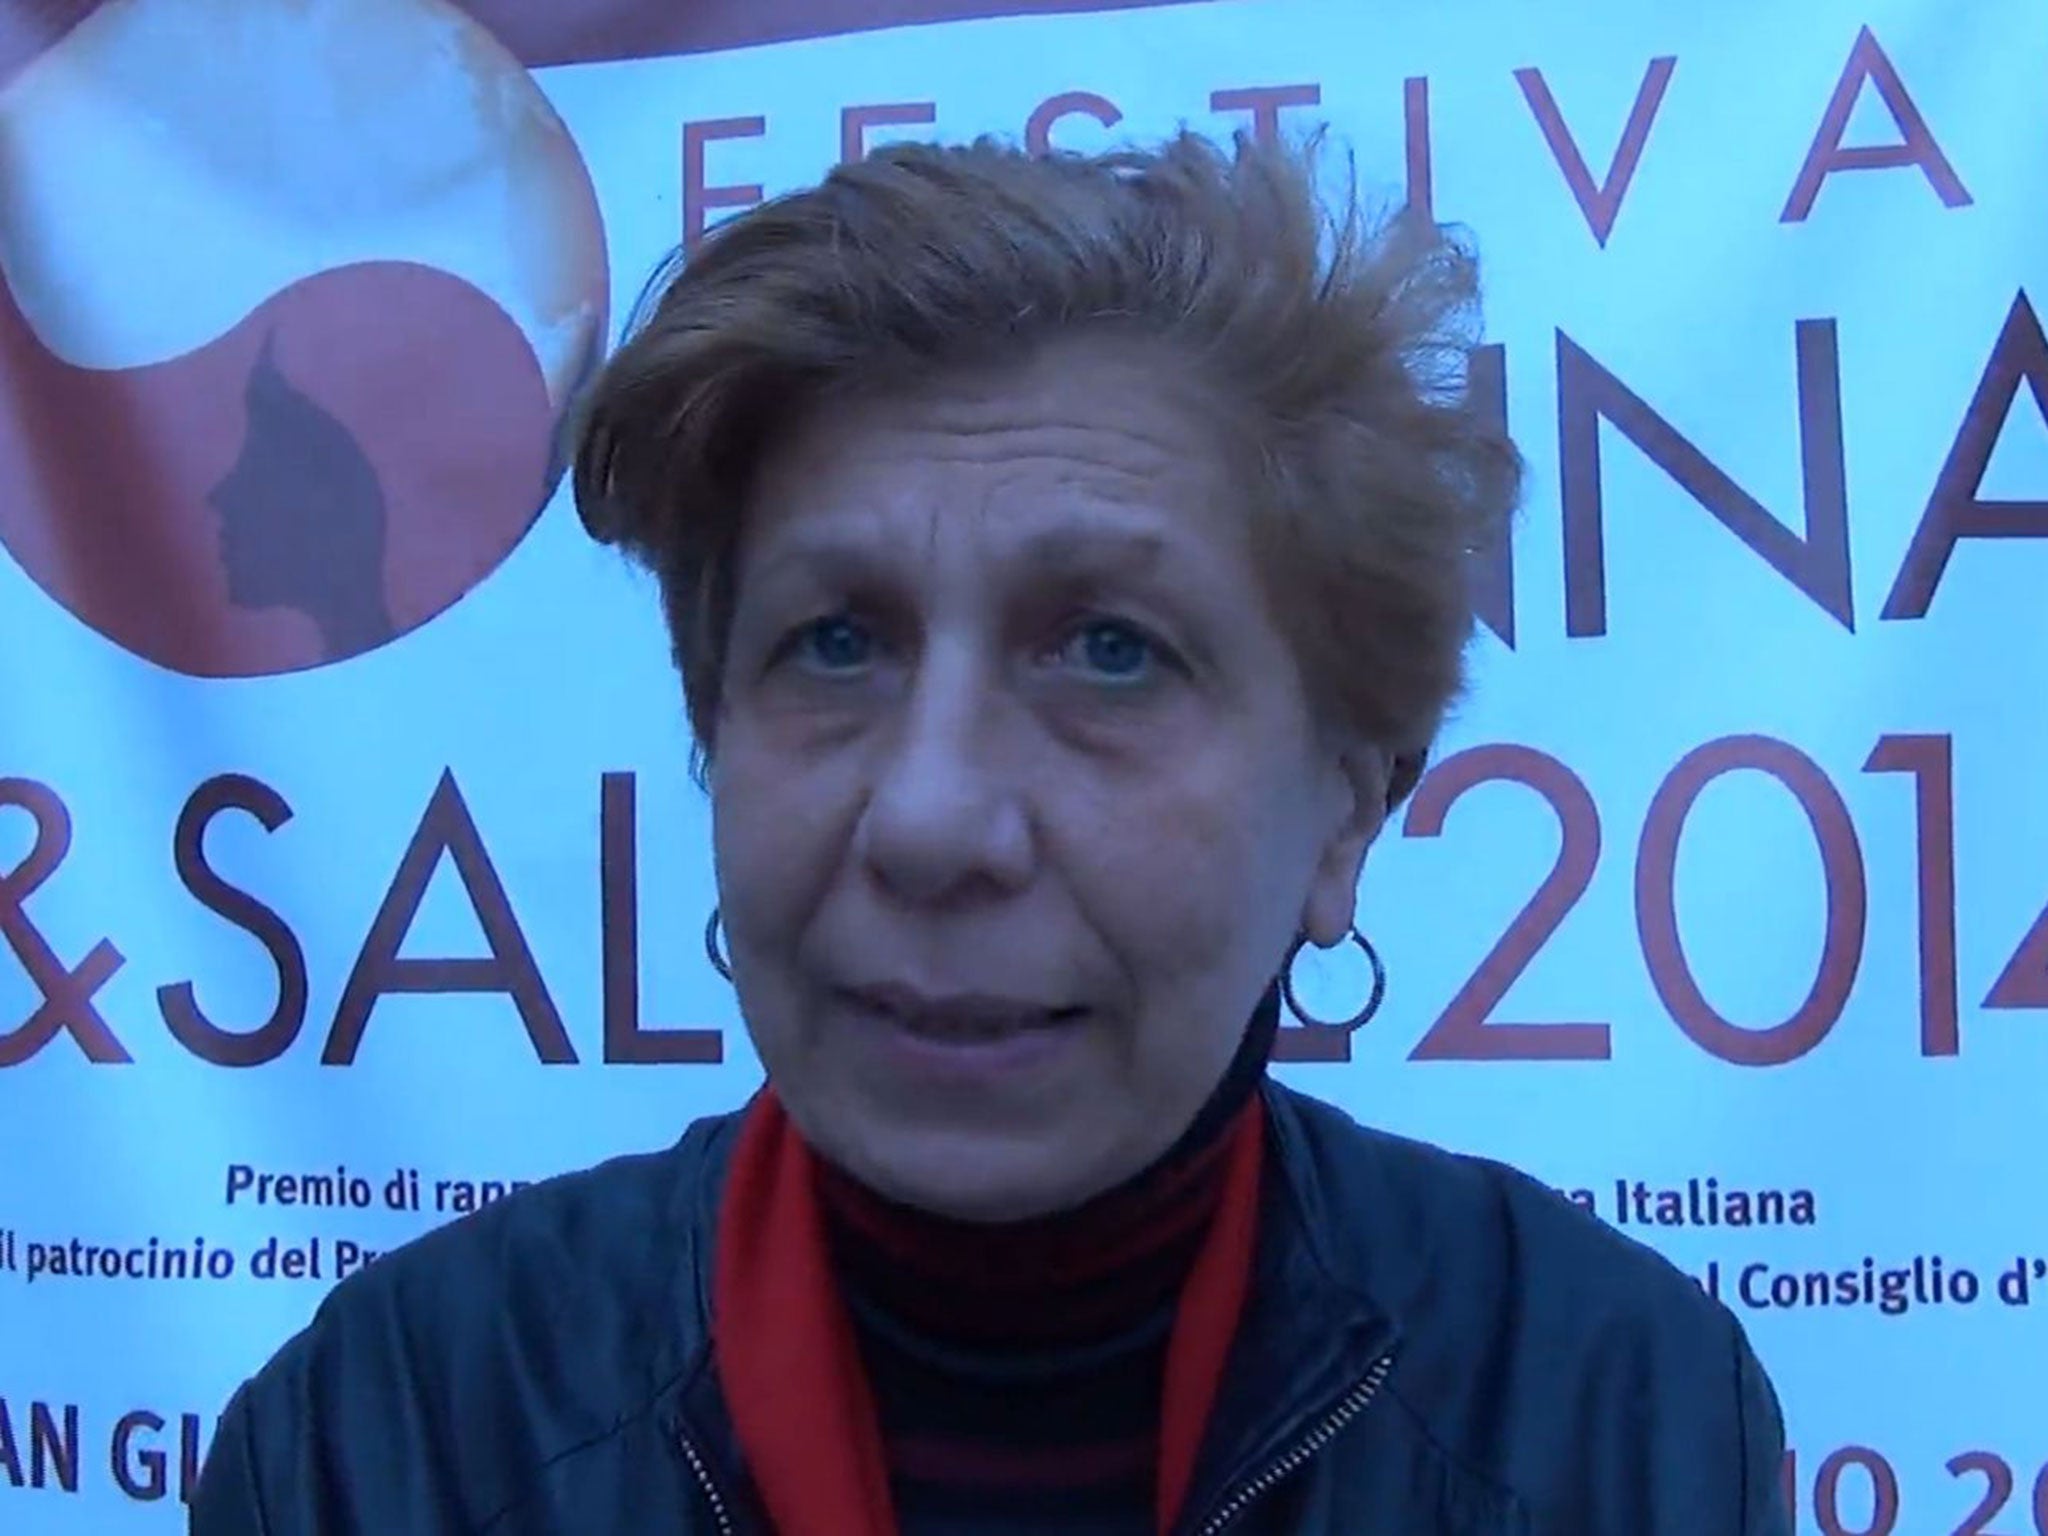 Silvana Agatone is the president of the Free Association of Italian Gynaecologists for the Application of Law 194